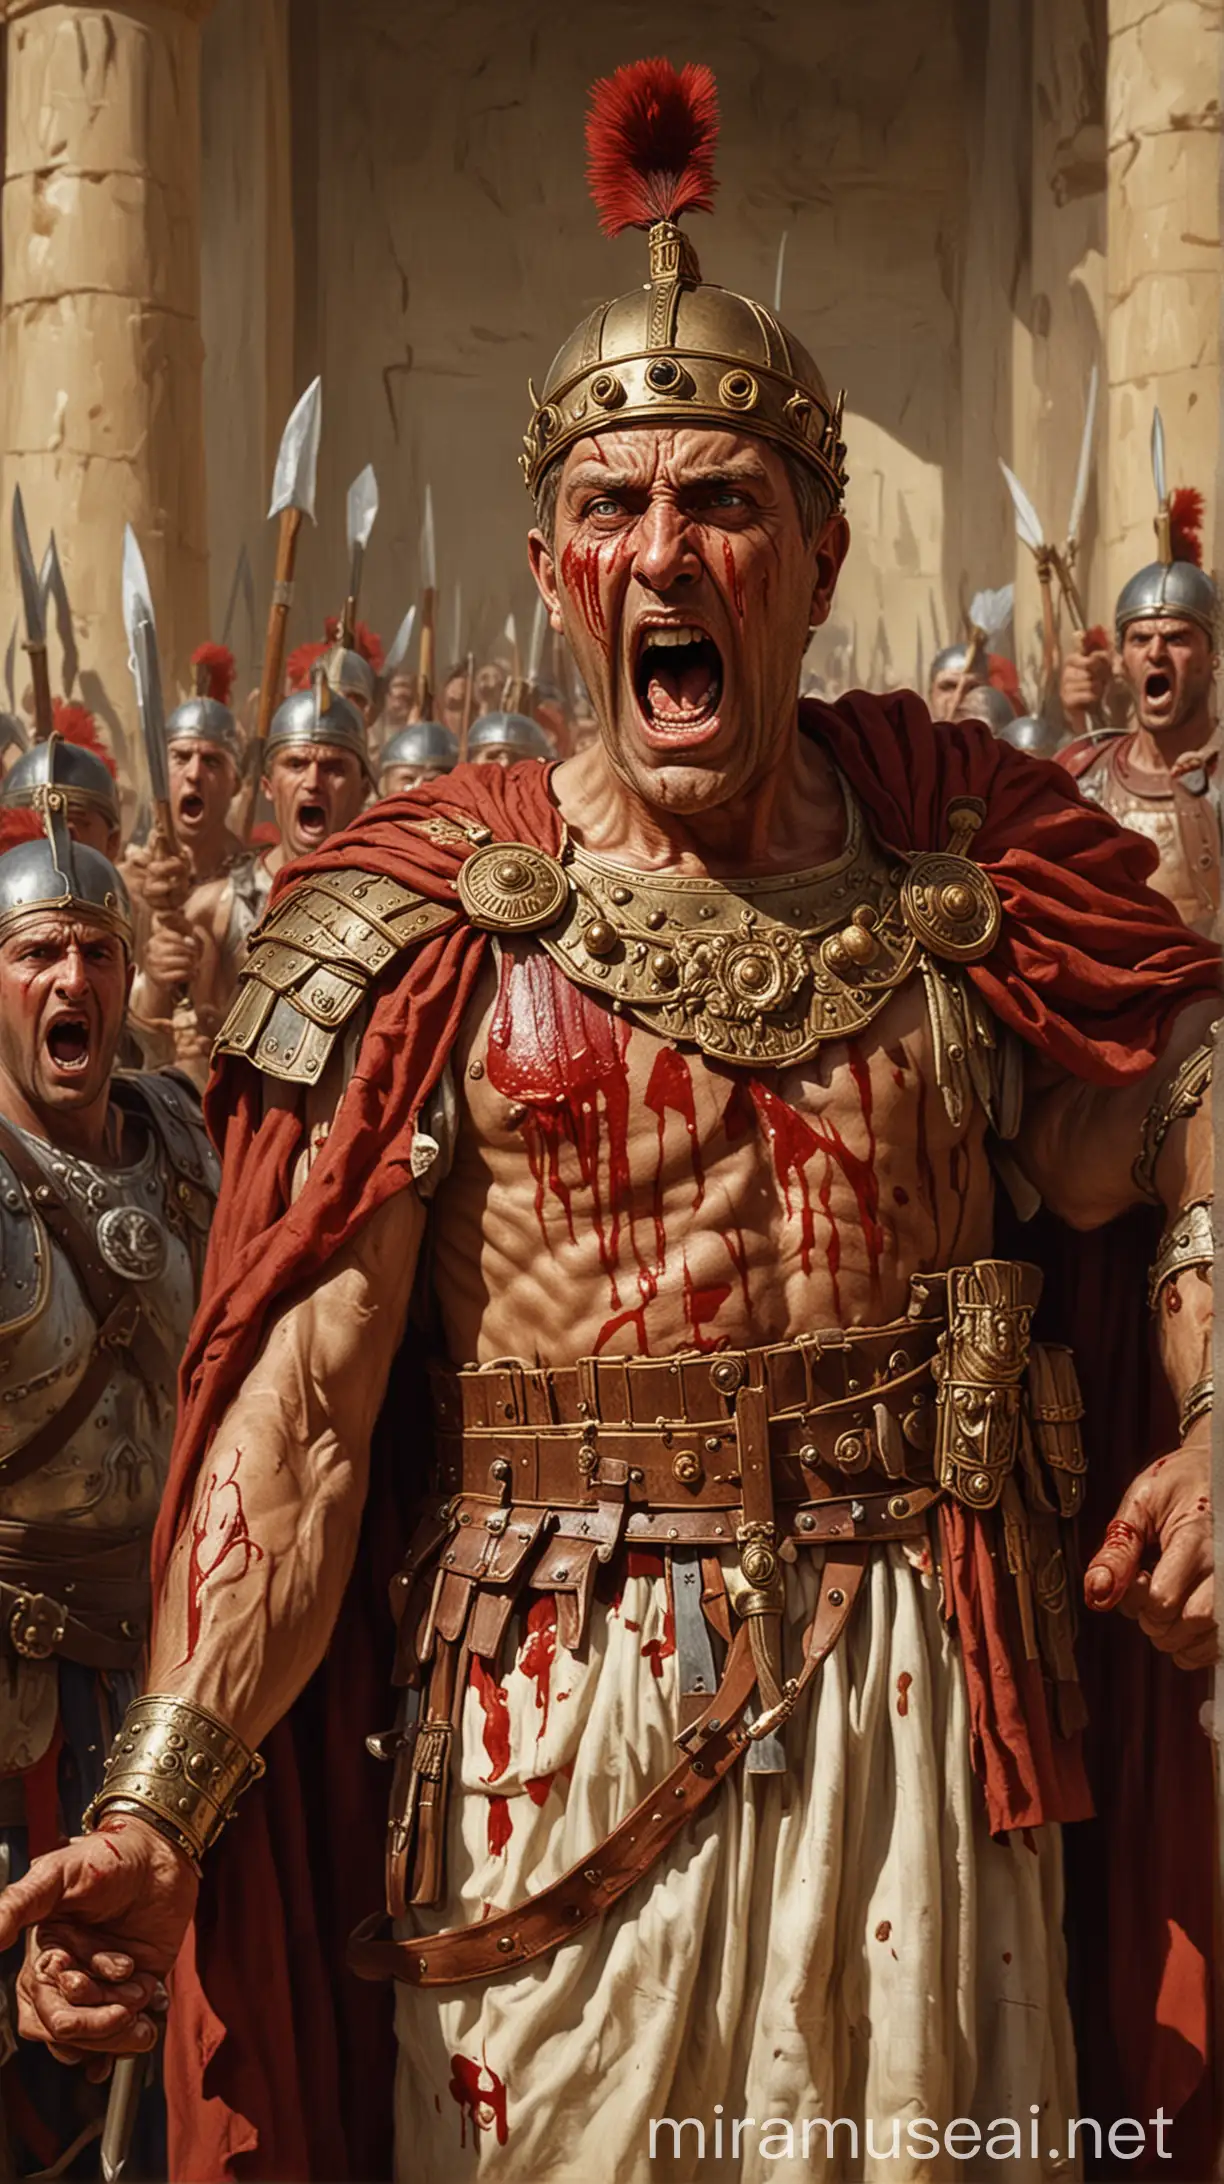 Illustrate Emperor Valentinian angrily yelling at envoys from a Germanic tribe, with a burst blood vessel depicted.
